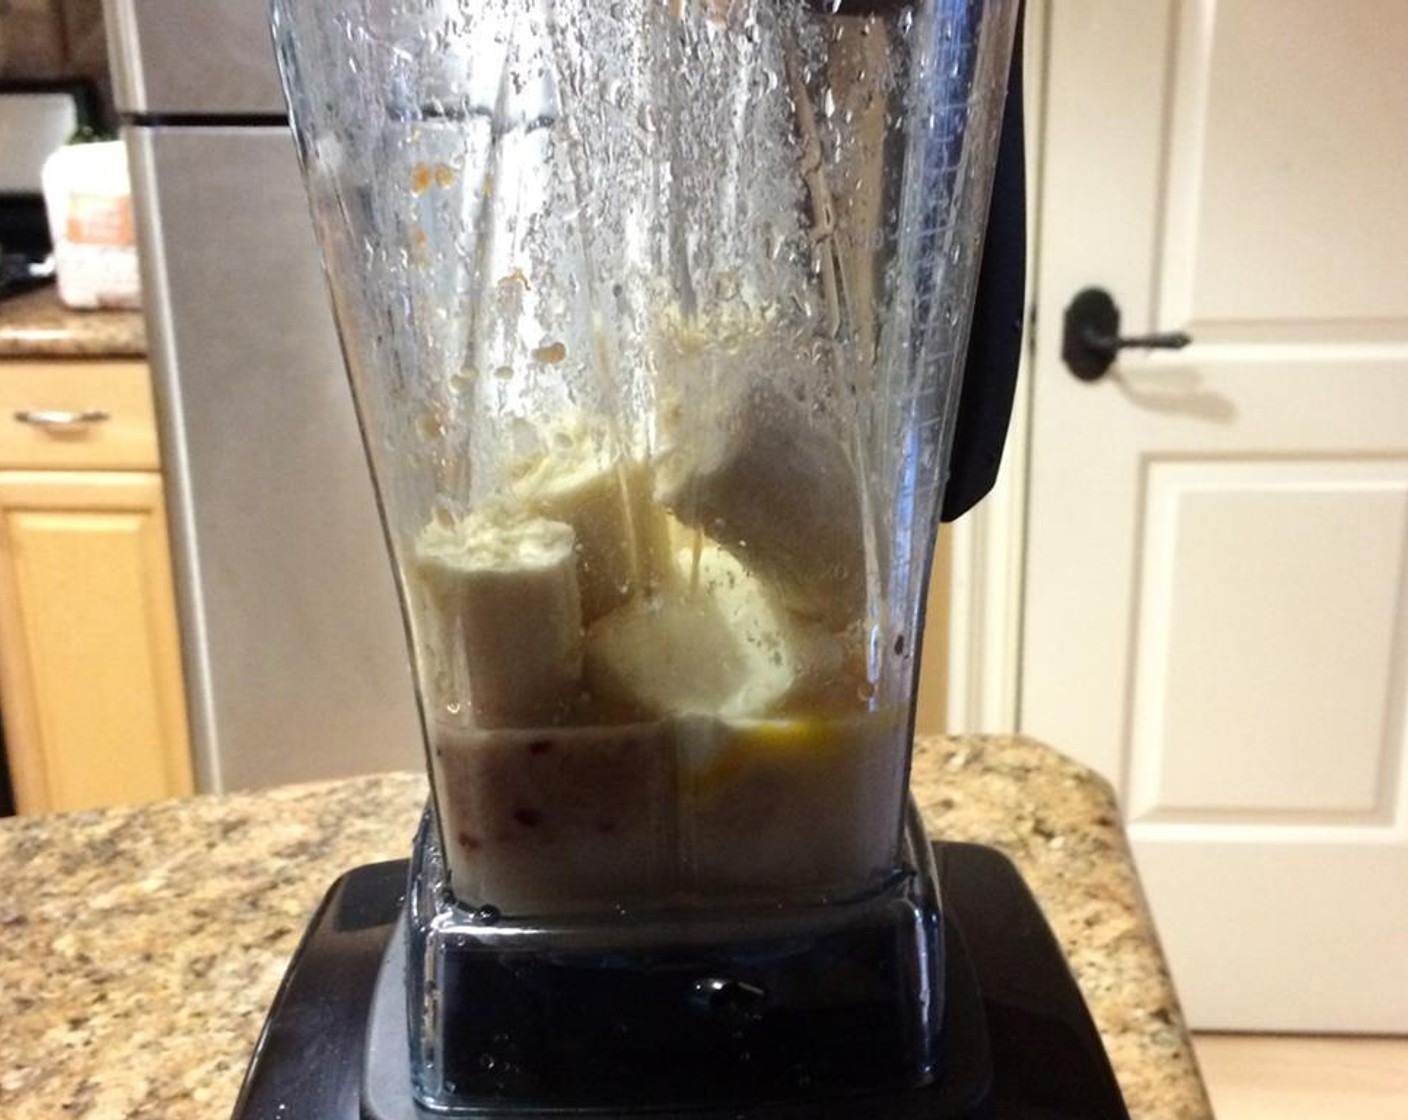 step 3 In this order, add ingredients to the Vitamix: Egg (1), Granulated Sugar (2/3 cup), Unsalted Butter (1/4 cup) Non-Fat Milk (1/3 cup), 1 tsp zest of the Lemon (1), Bananas (2), and Apple Sauce (1/4 cup). Variable 1-5, 15 seconds or until mixed.